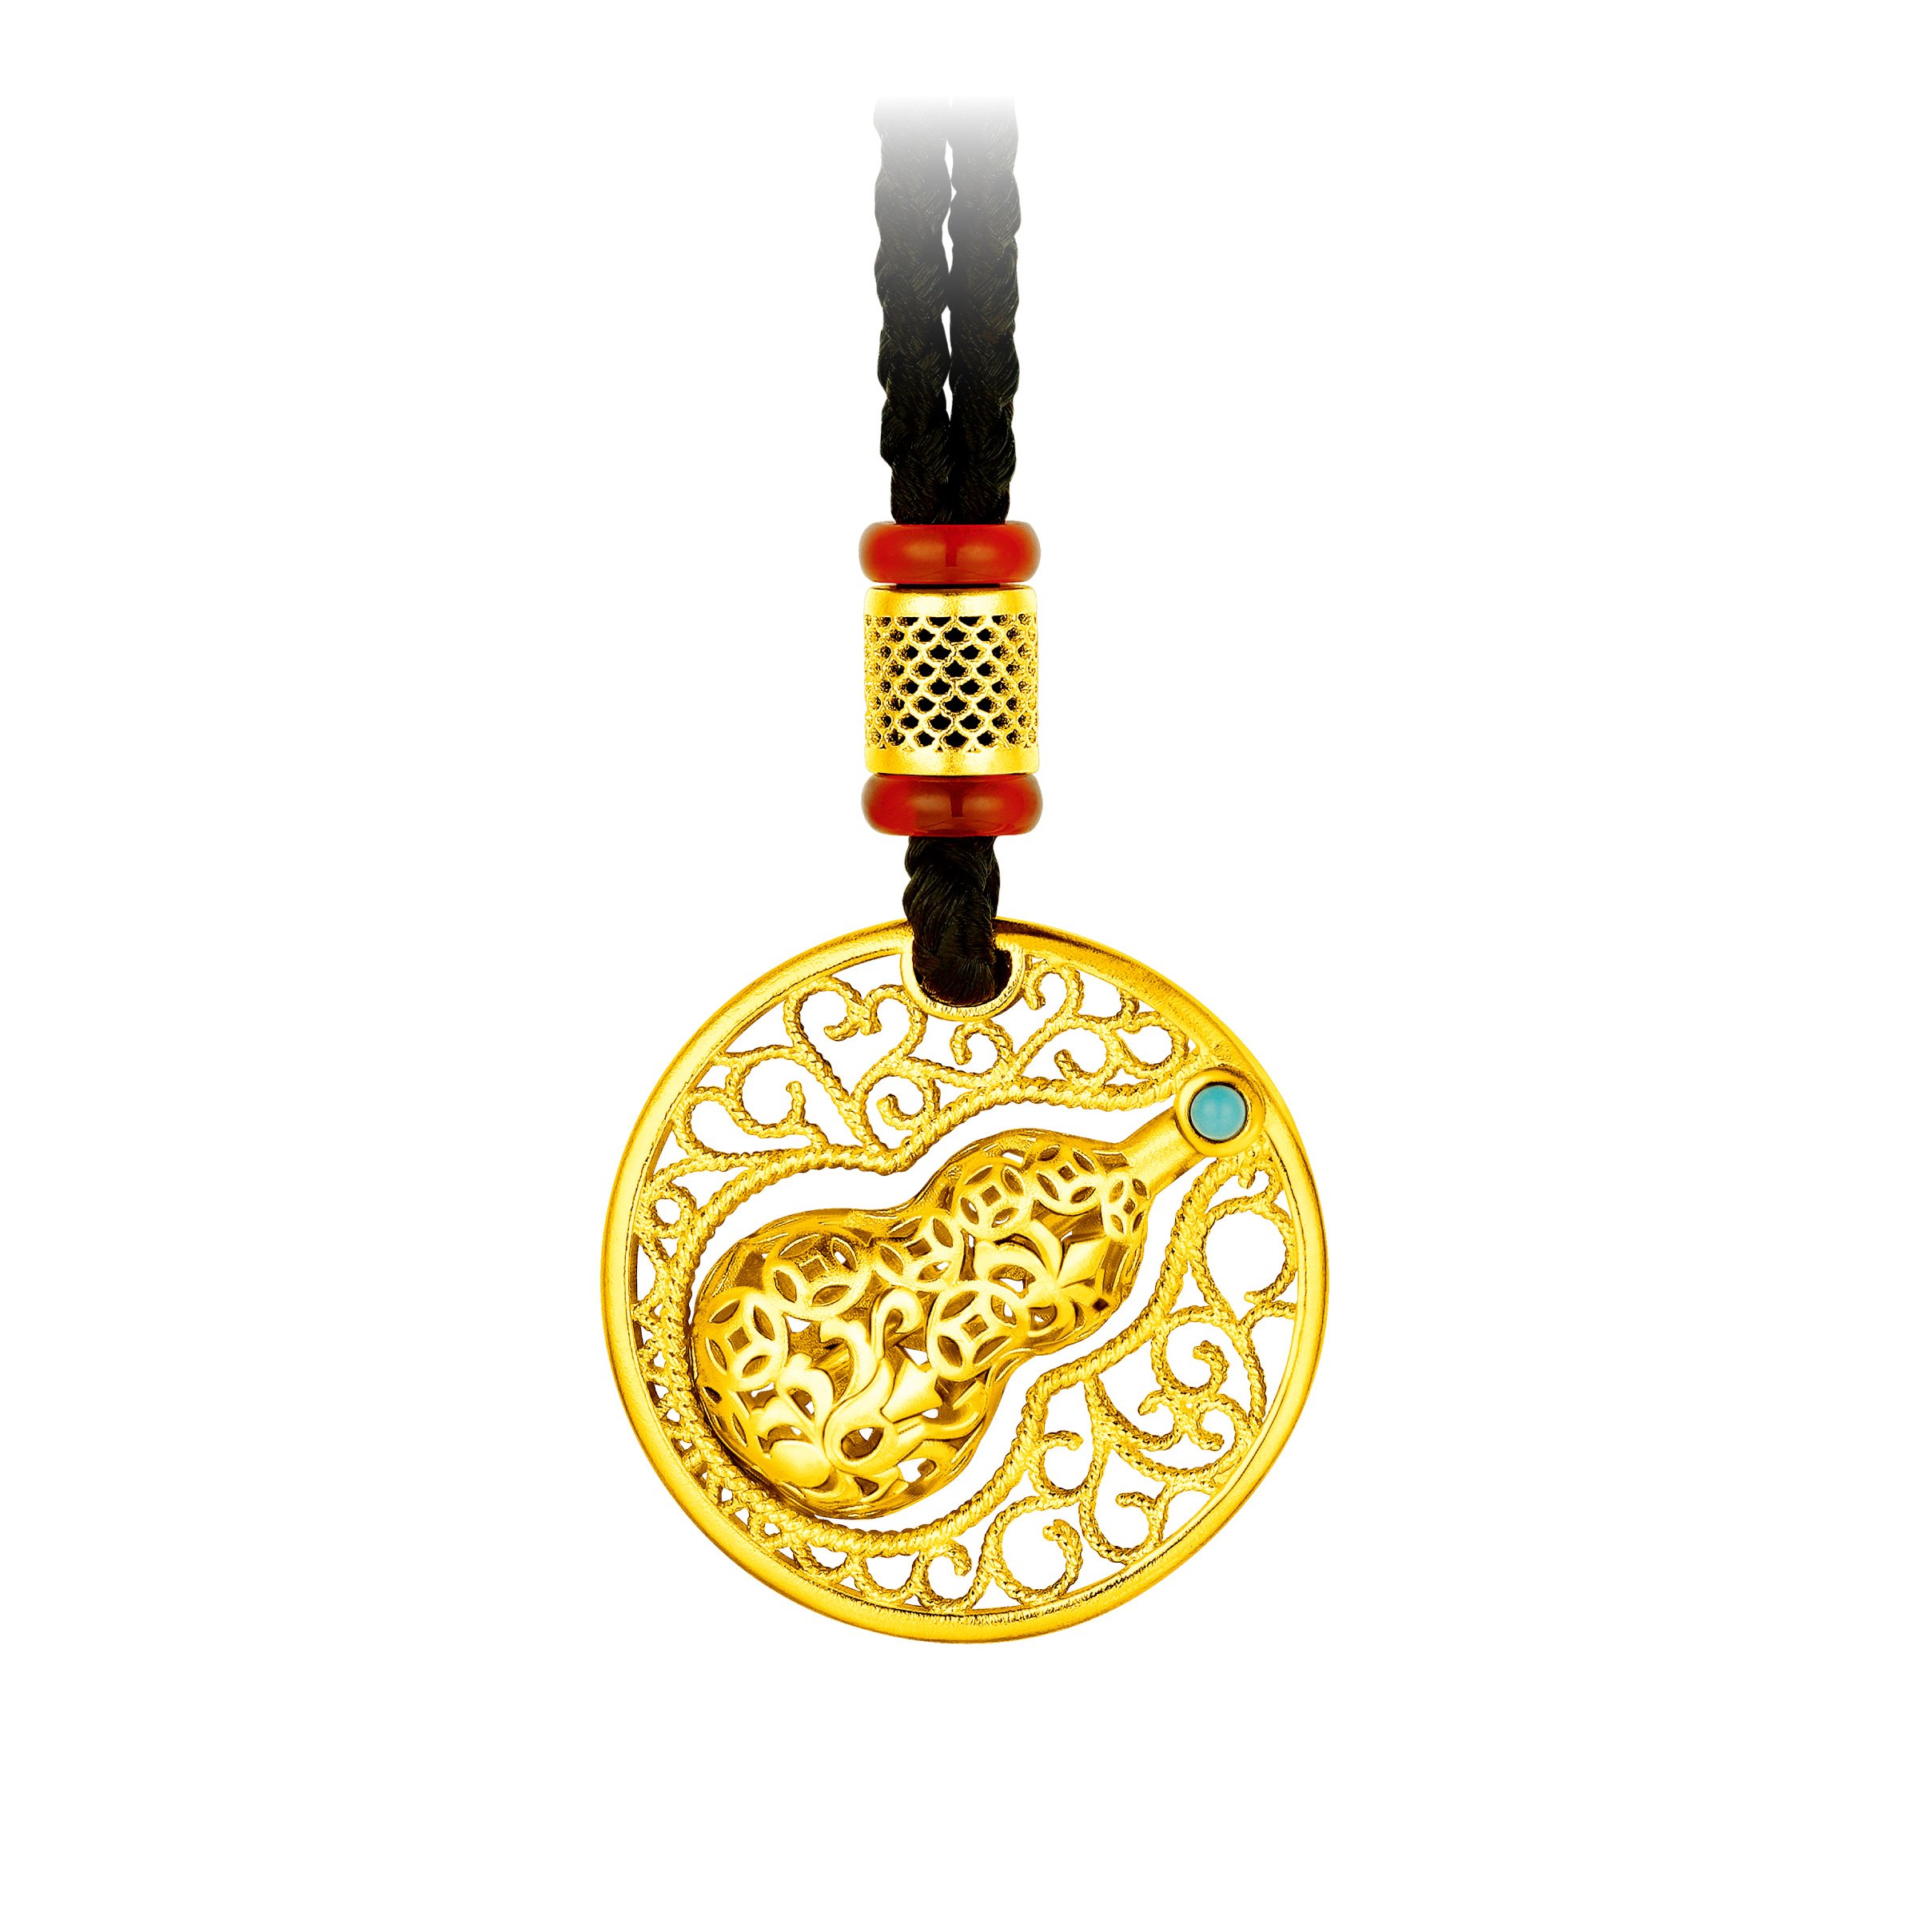 Antique Gold "Prosperity and Happiness" Gold Pendant